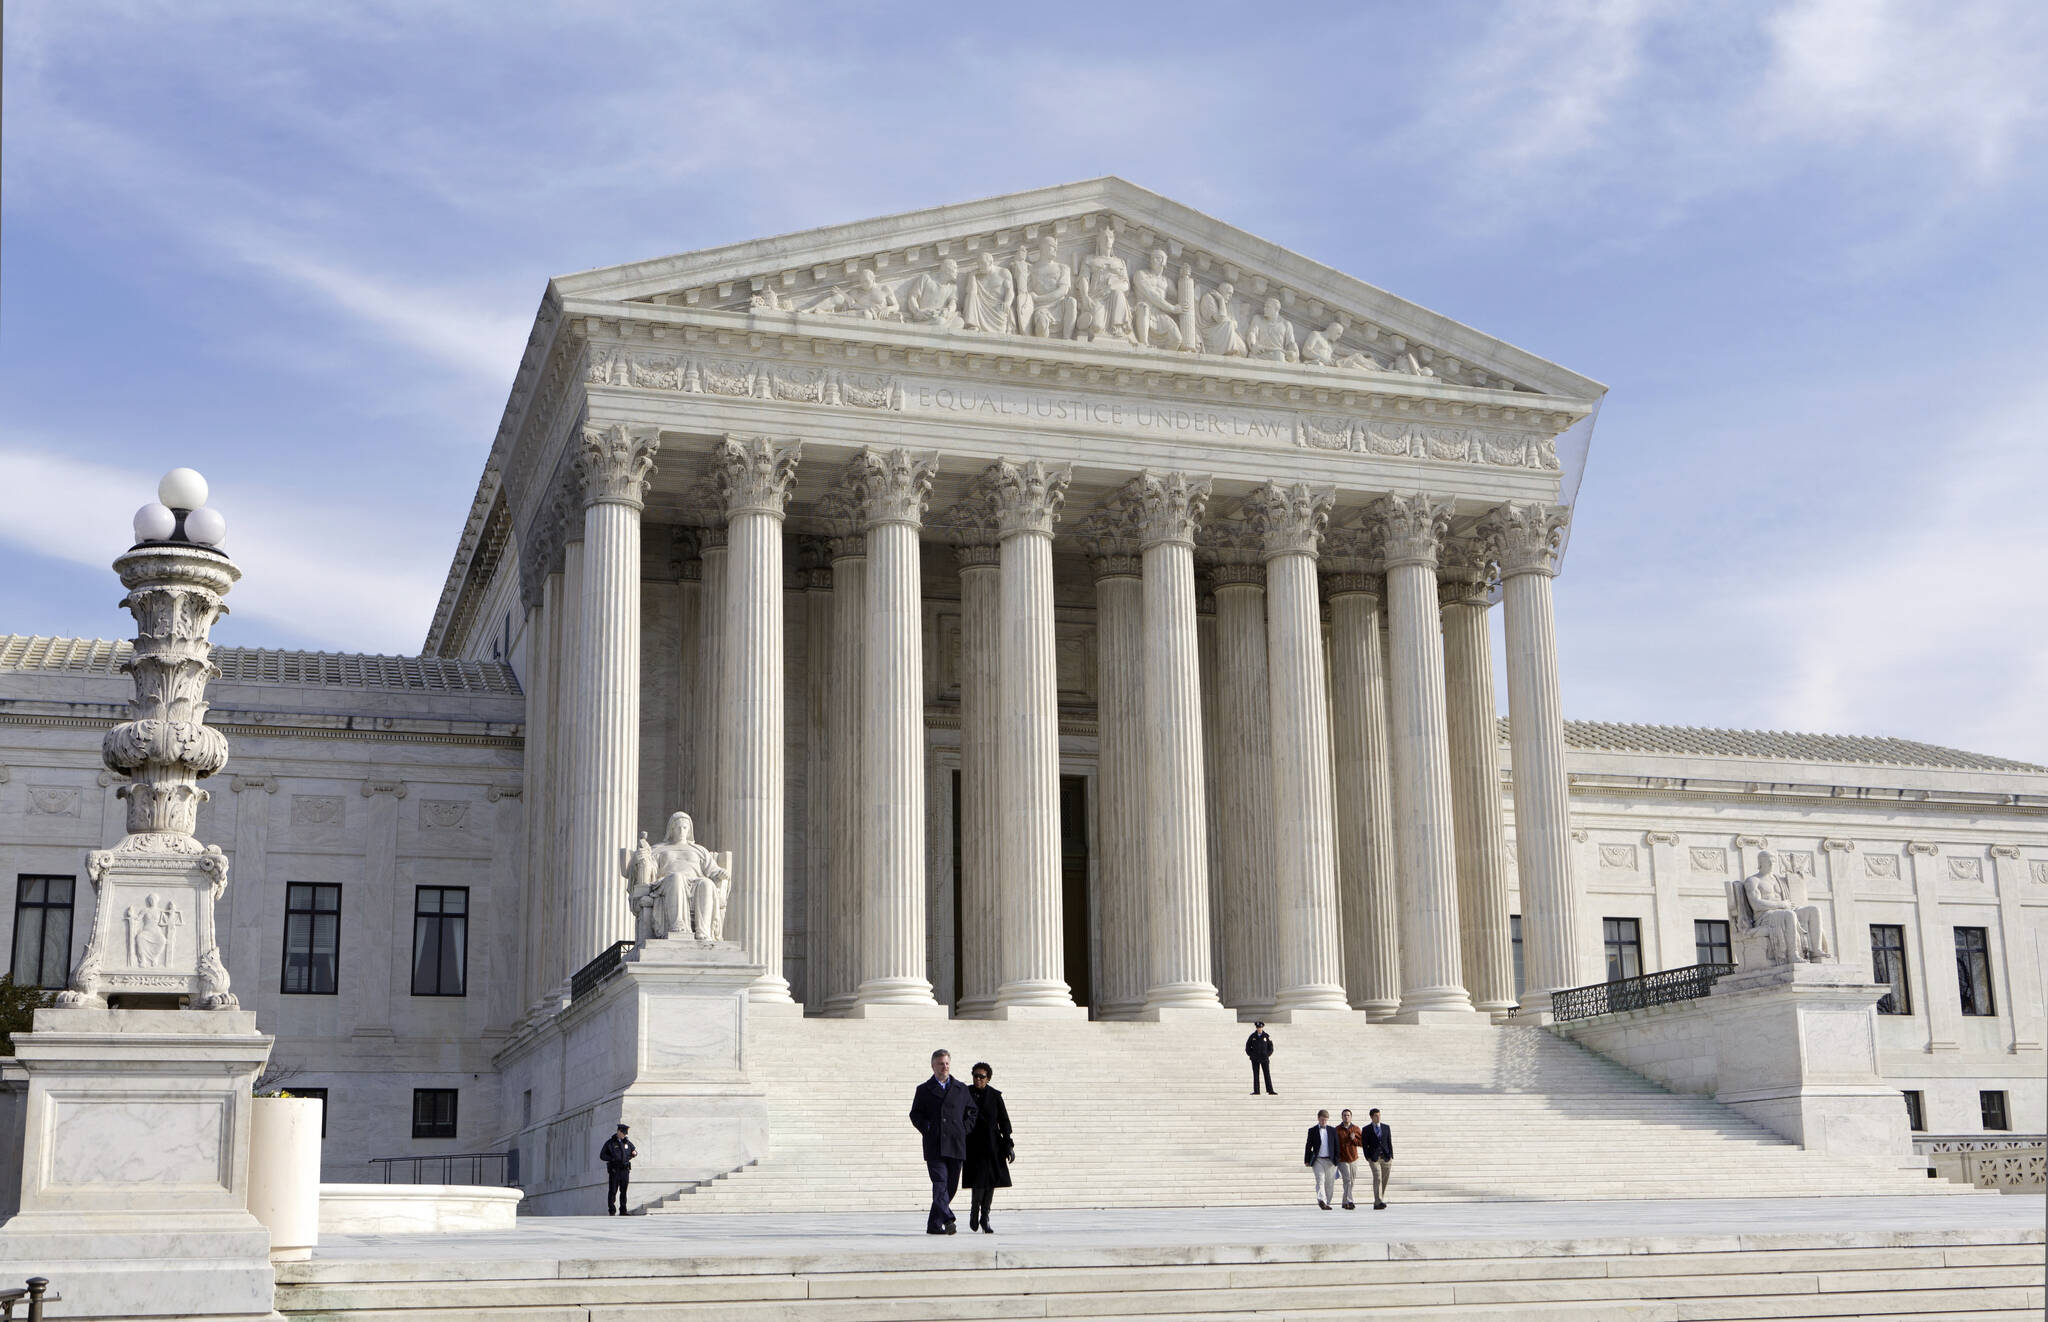 FILE - This photo shows the U.S. Supreme Court Building, Wednesday, Jan. 25, 2012 in Washington. A draft opinion circulated among Supreme Court justices suggests that a majority of high court has thrown support behind overturning the 1973 case Roe v. Wade that legalized abortion nationwide, according to a report published Monday night, May 2, 2022 in Politico. (AP Photo / J. Scott Applewhite, File)